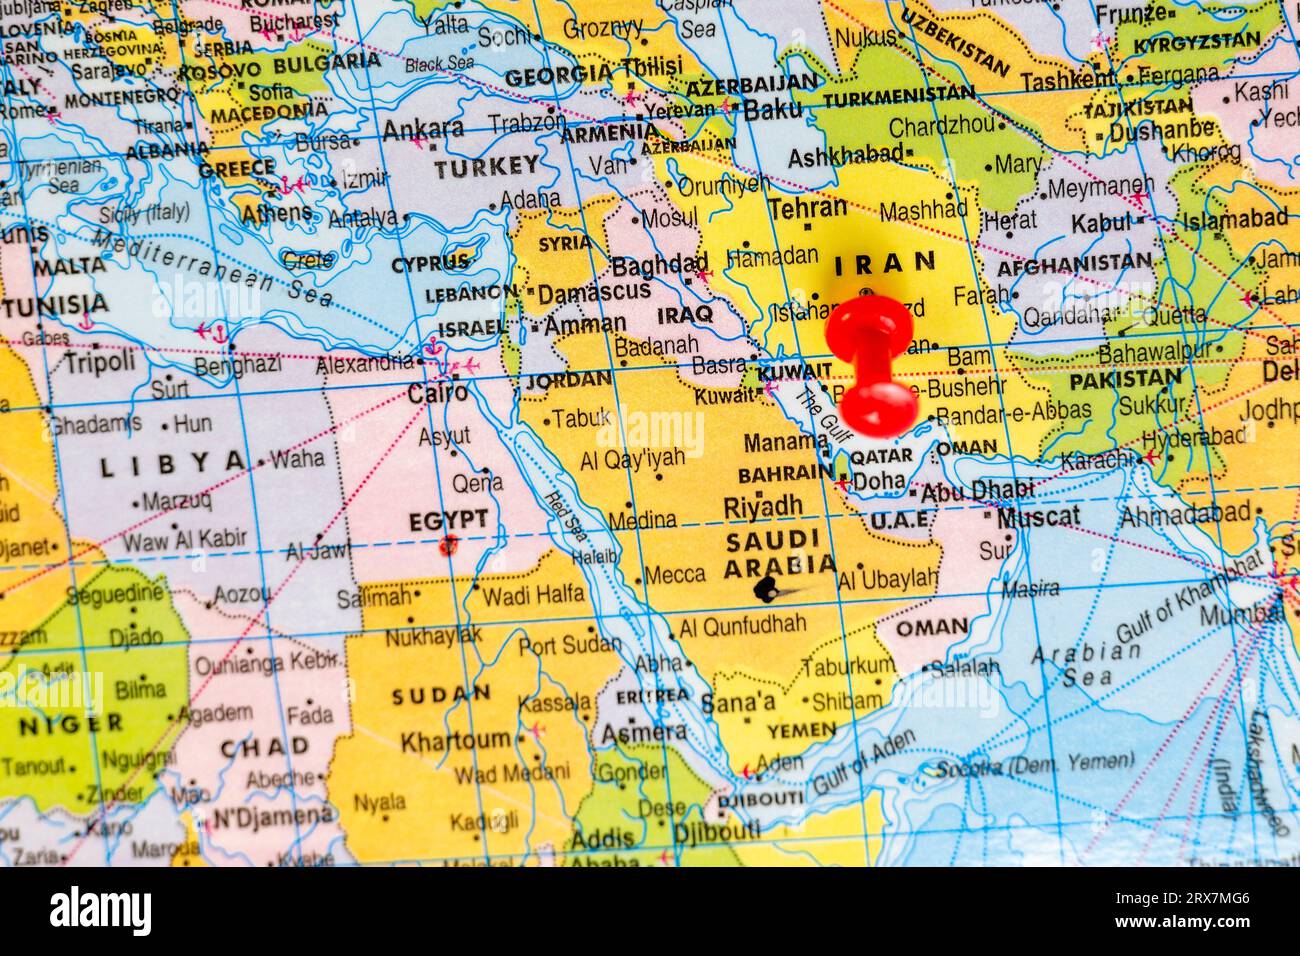 This stock image shows the location of Iran on a world map Stock Photo